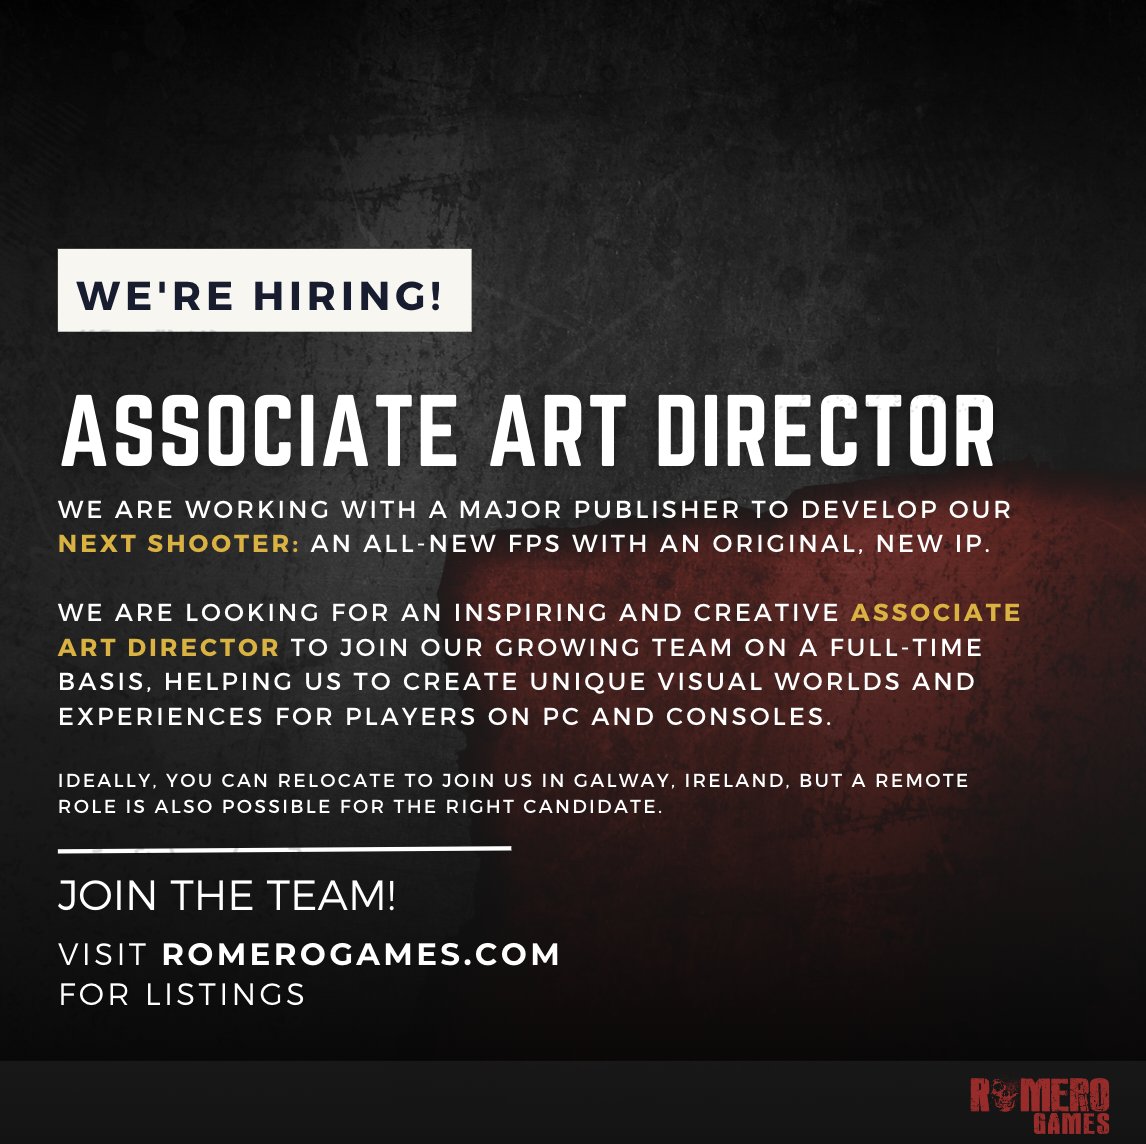 Hiring!! We're looking for an Associate Art Director for our upcoming FPS. Join a welcoming and inclusive team of over 60 great game devs. #hiring #gamedev #artdirection #gameart #gamejobs